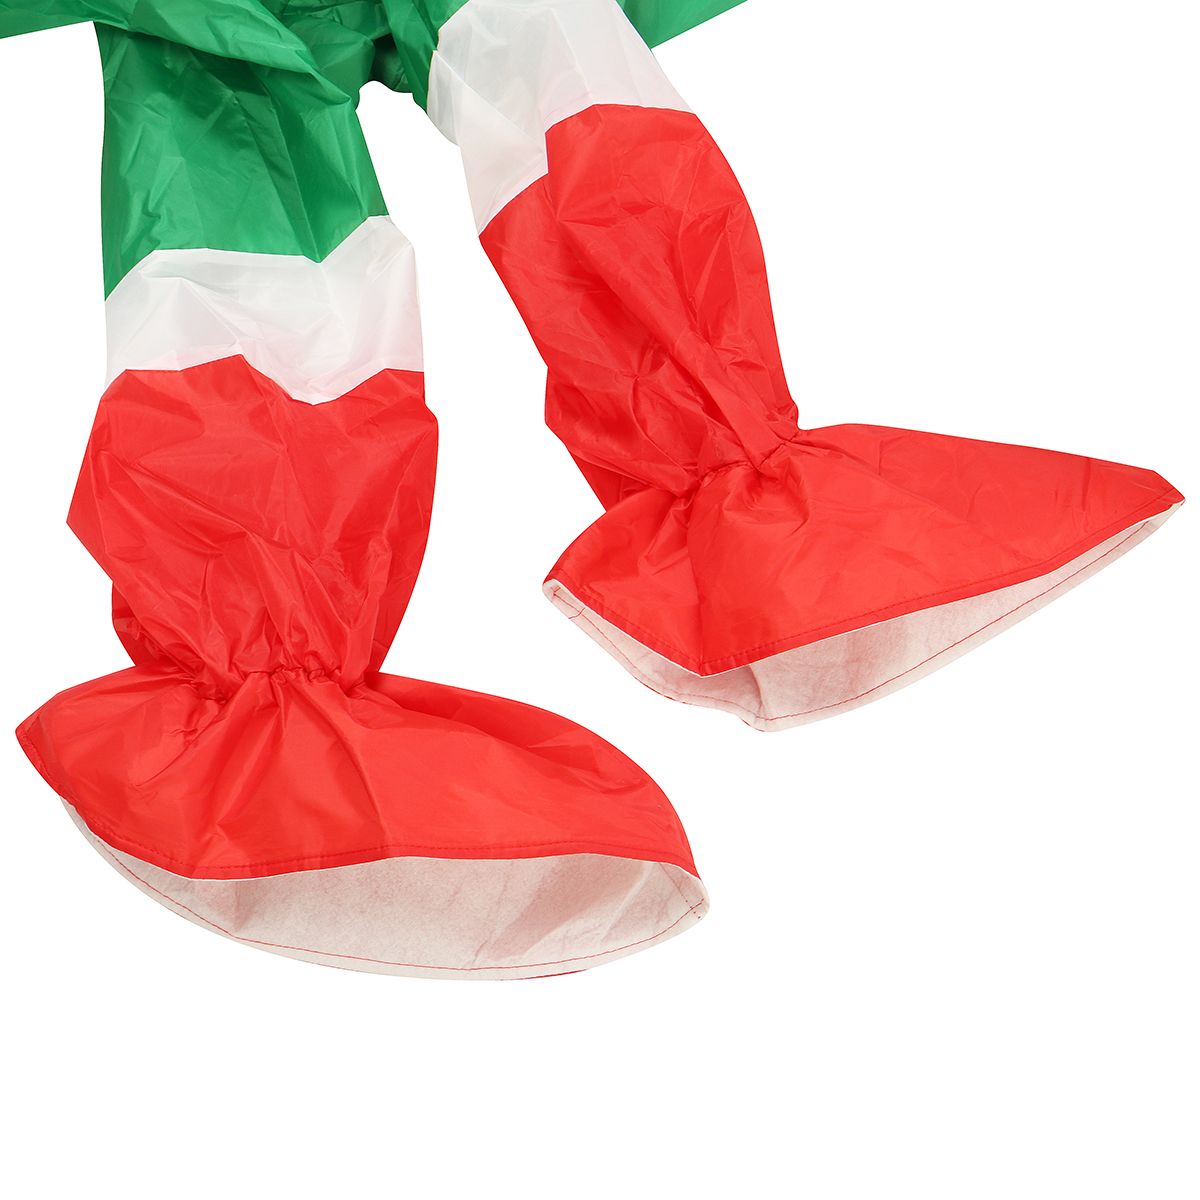 Costume-Christmas-Tree-Inflatable-Adult-Halloween-Party-Fancy-Dress-Mens-Prop-Decorations-1605483